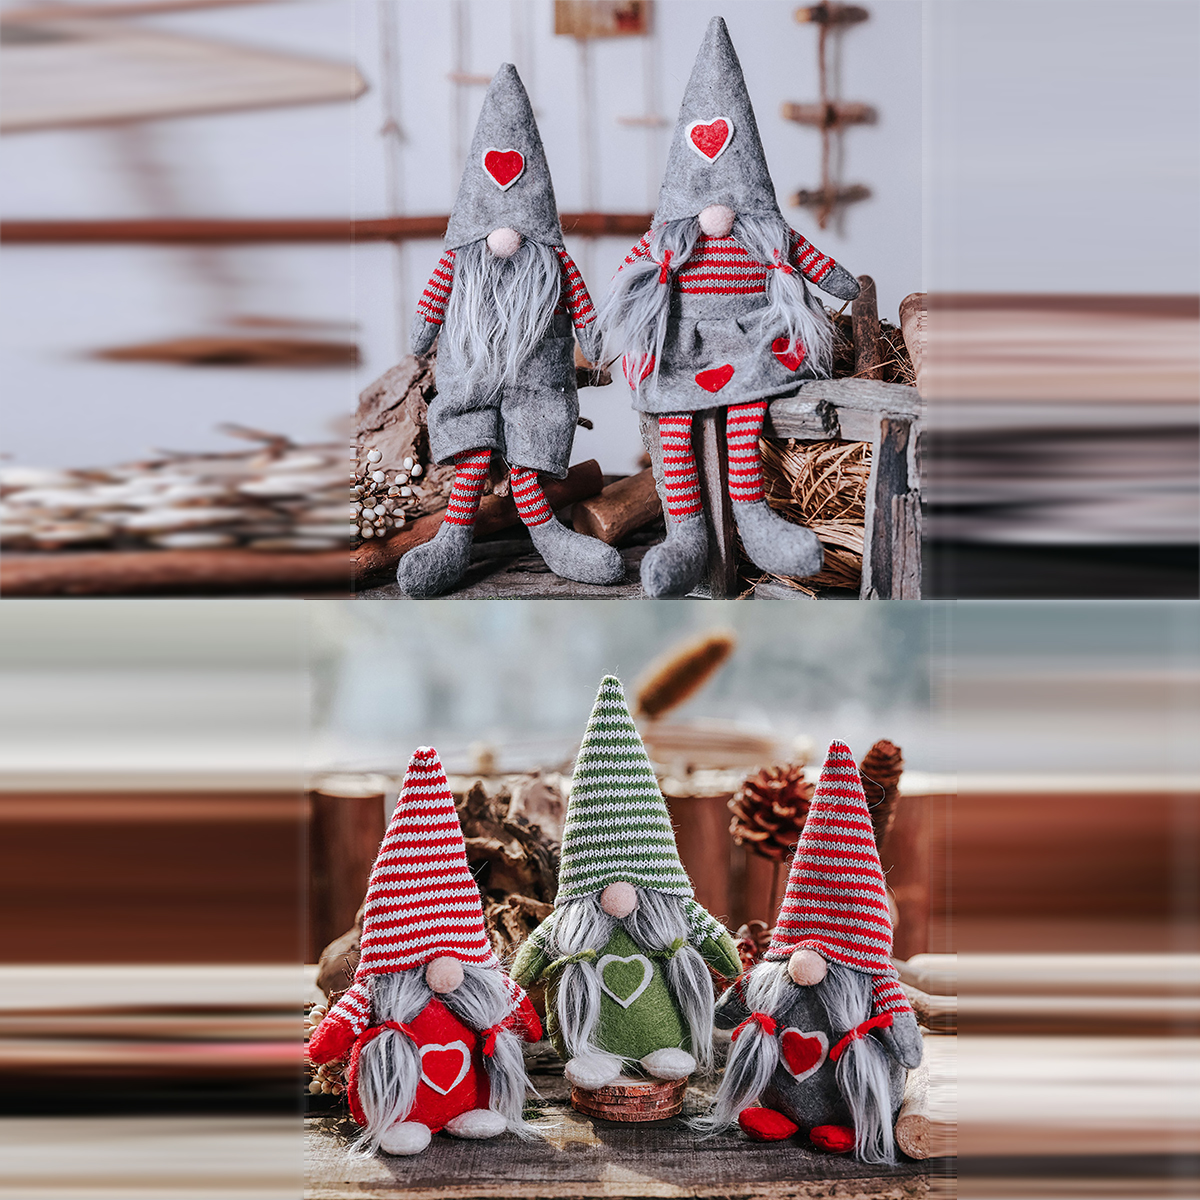 Non-Woven-Hat-With-Heart-Handmade-Gnome-Santa-Christmas-Figurines-Ornament-Holiday-Table-Decorations-1634099-5